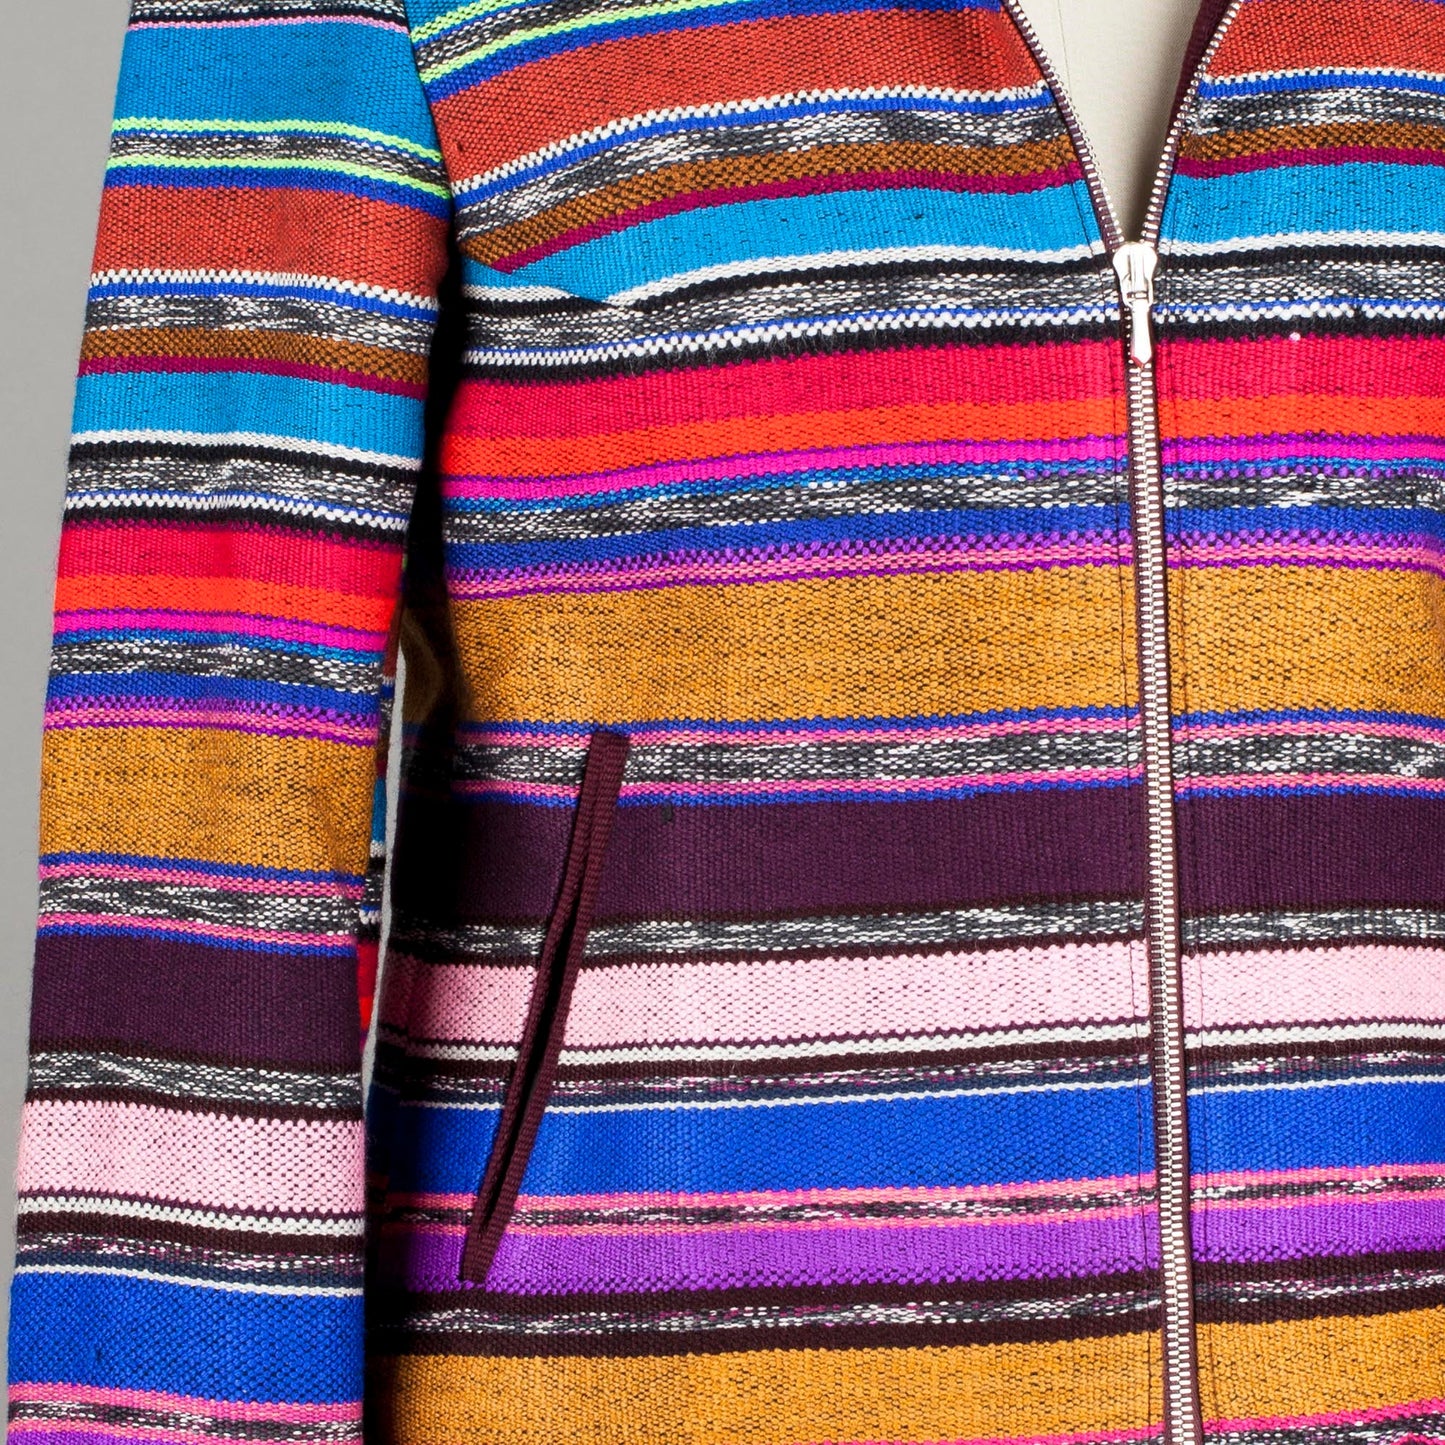 Women's blazer jacket 'No.8' with high collar, colorful stripes, unique piece made from hand-woven fabrics, fairly traded, hand-sewn in Germany